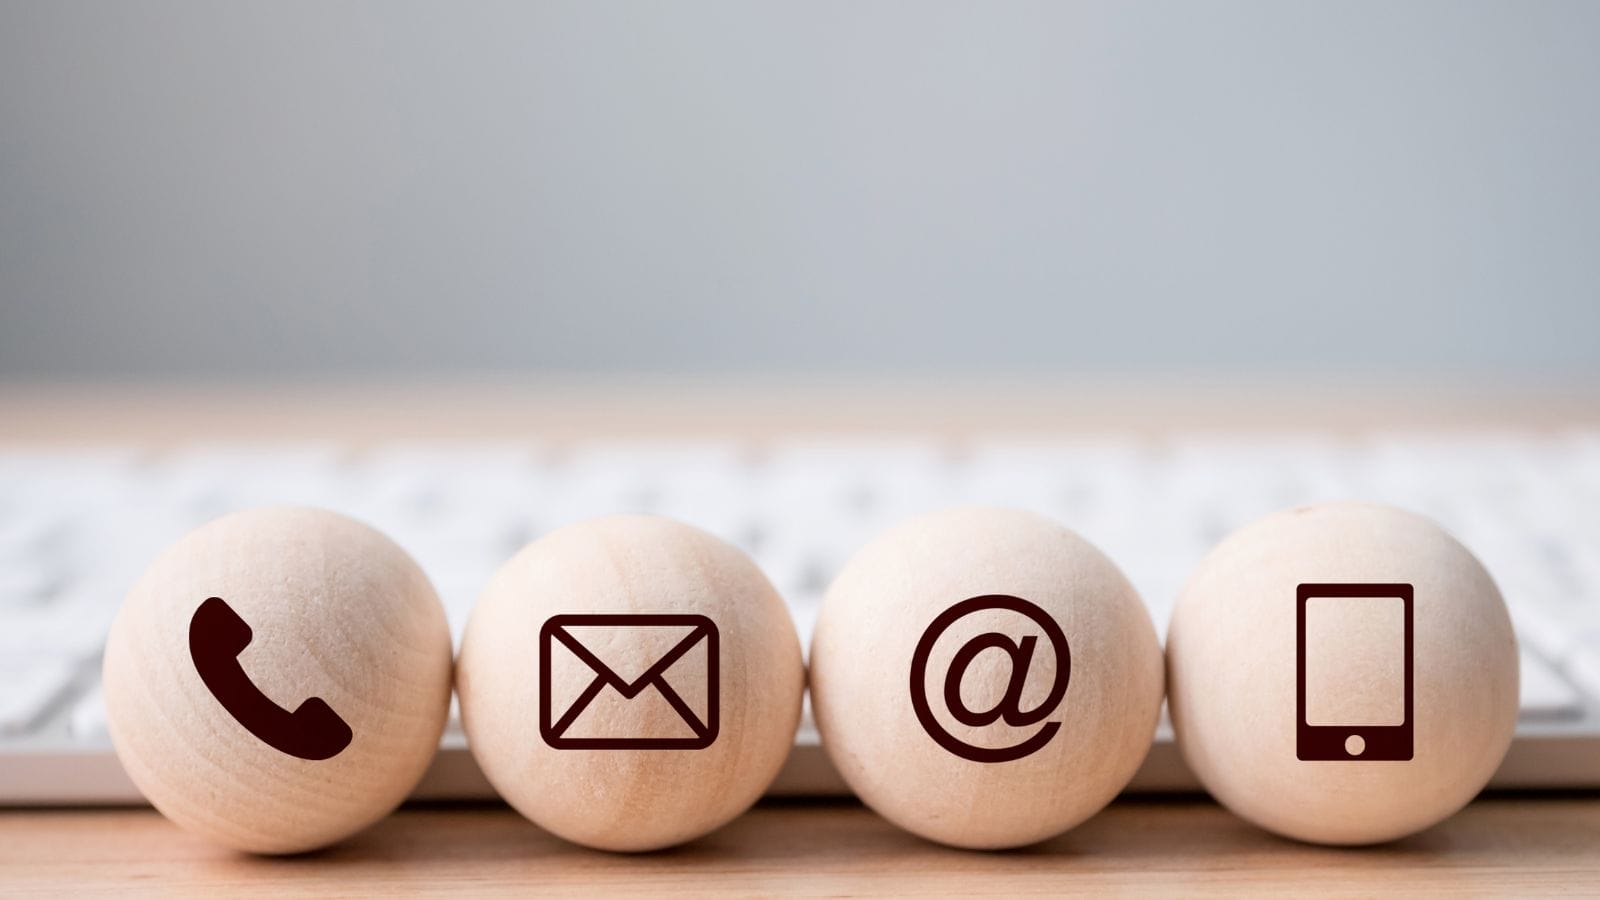 wooden balls showing symbols for phone, email, at, and phone